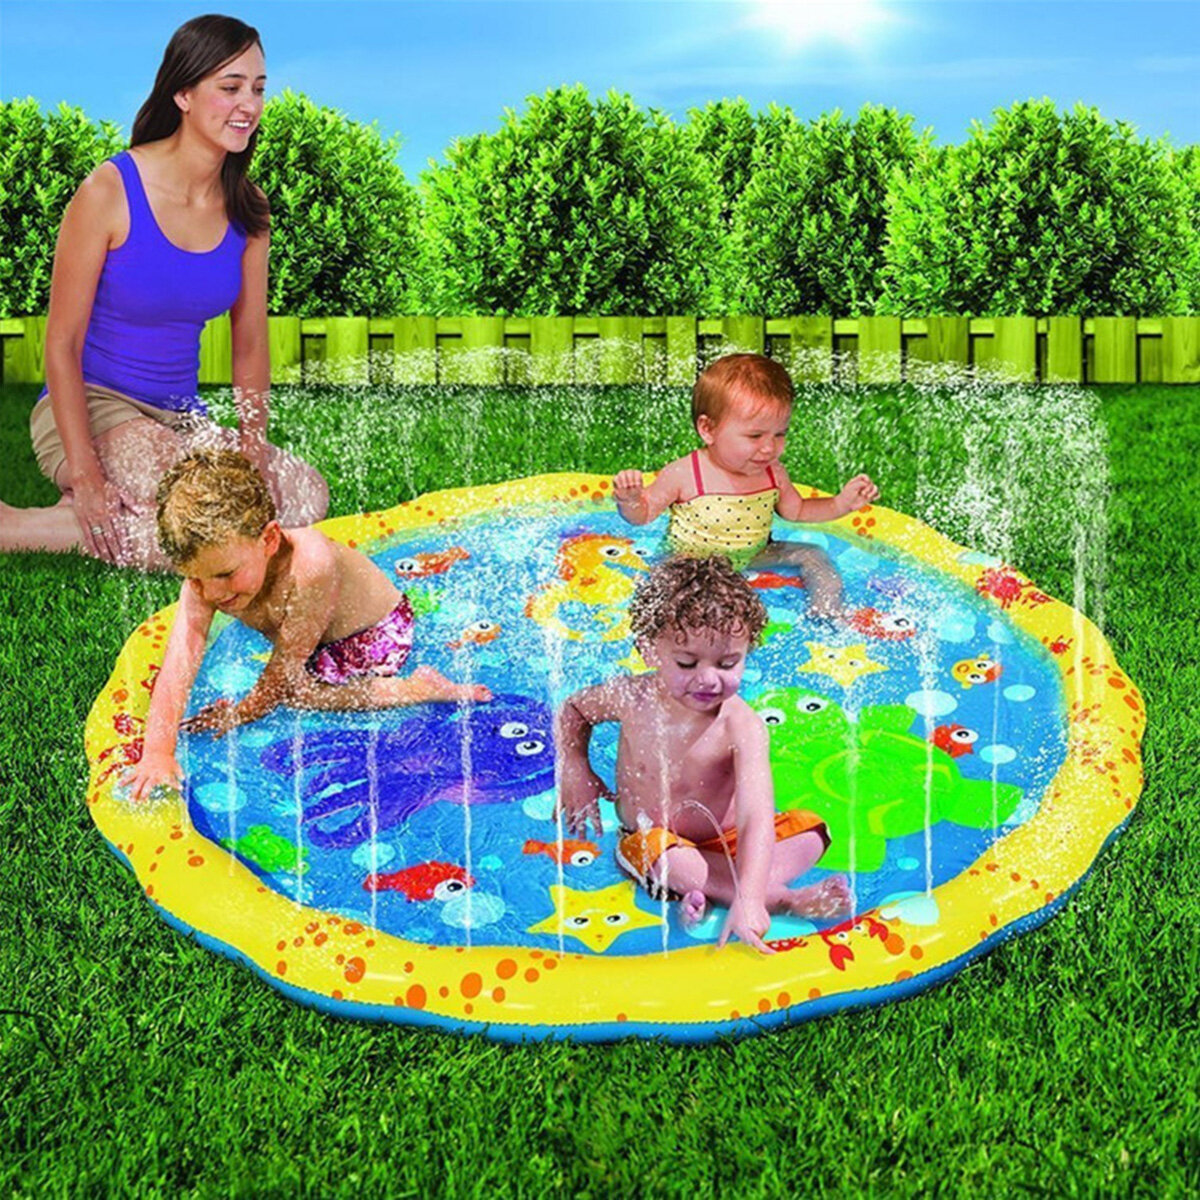 100CM Inflatable Childrens Lawn Splash Sprinkler Mat Play Pad with PVC Material for Outdoor